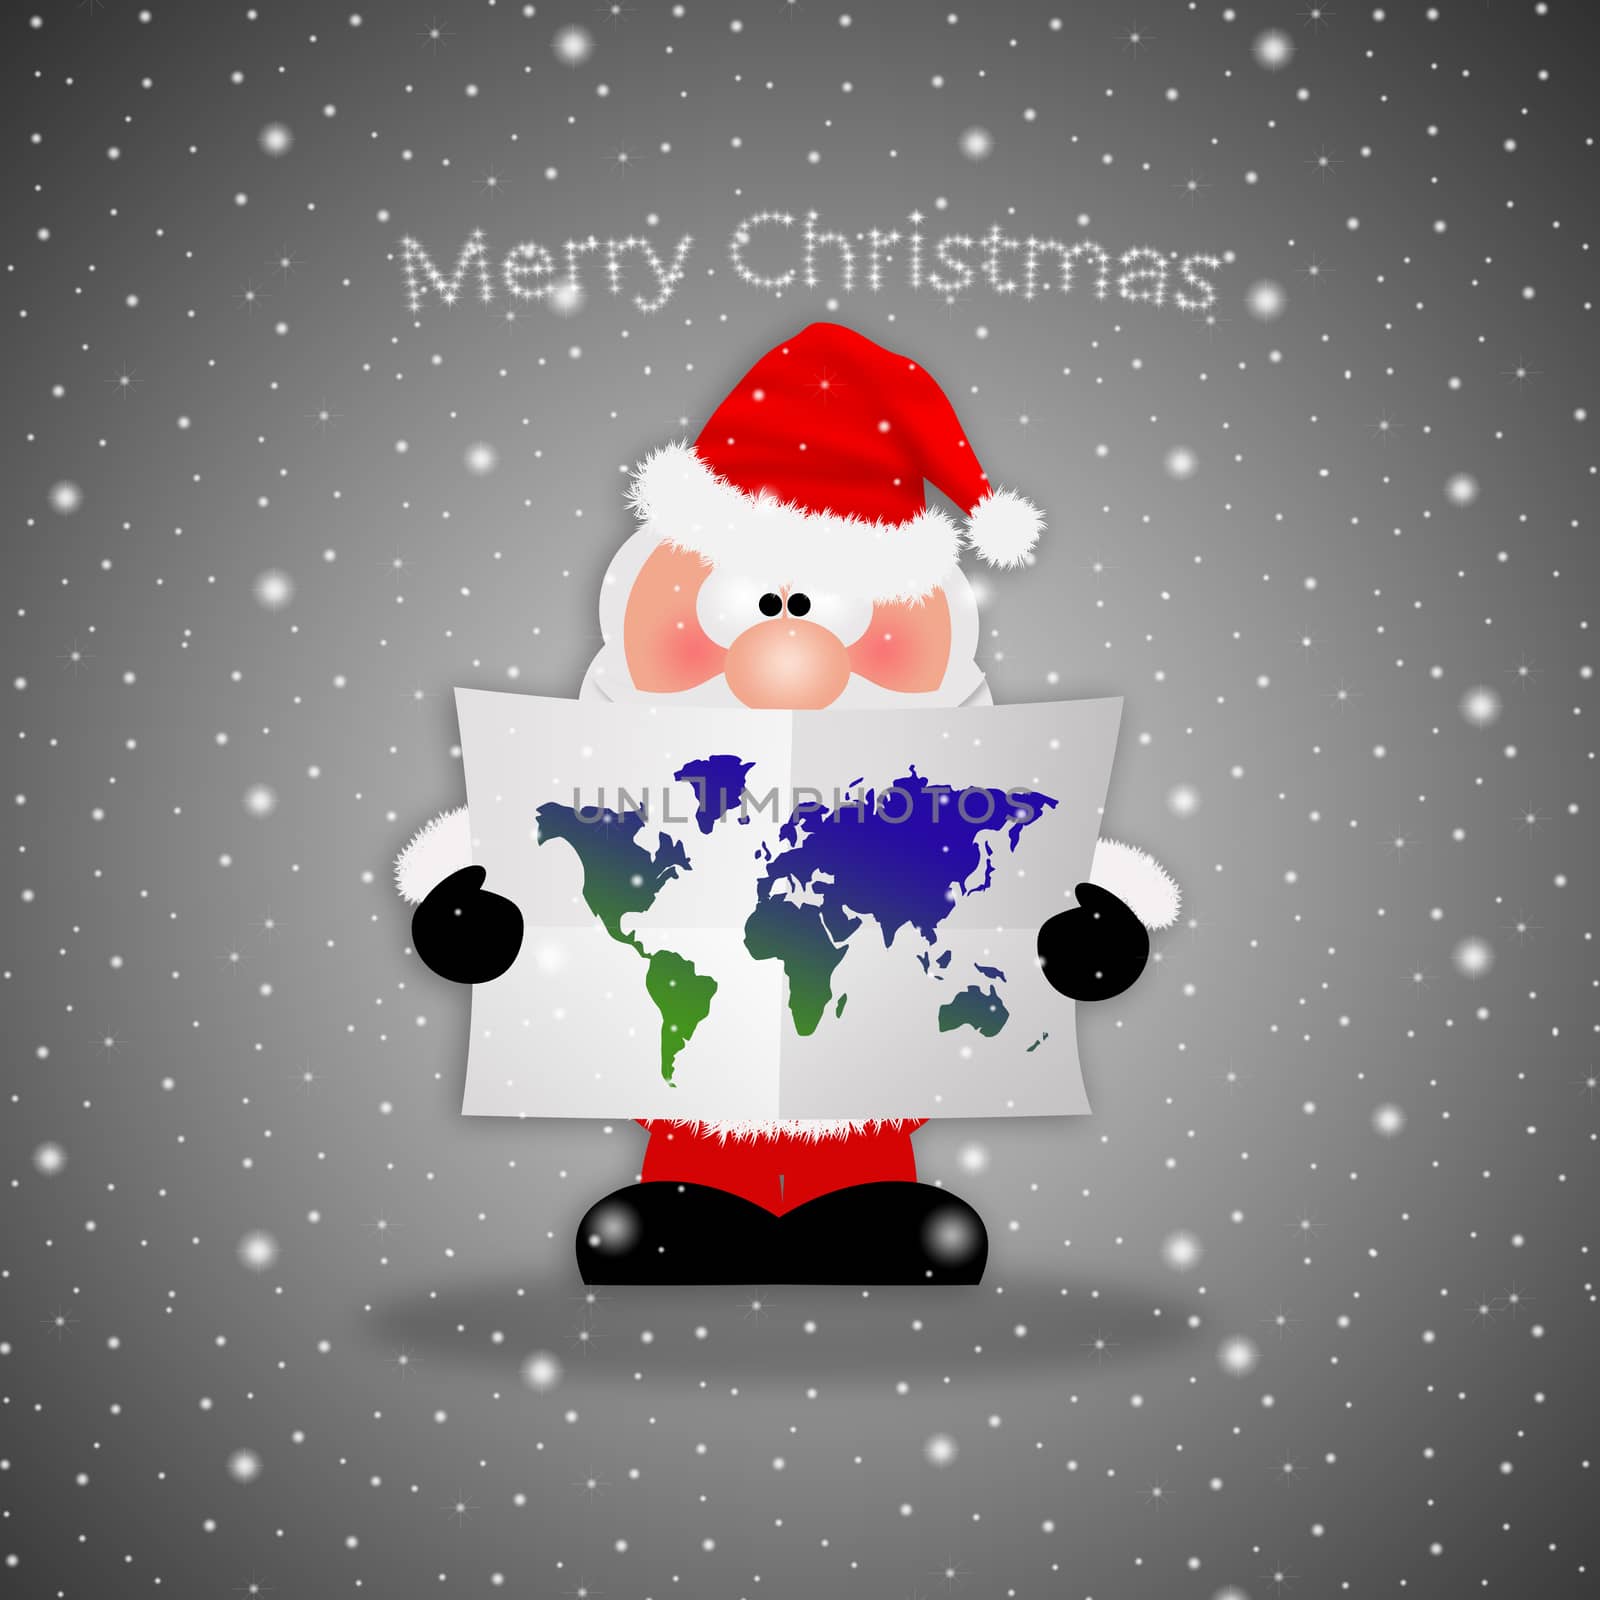 Santa Claus with map